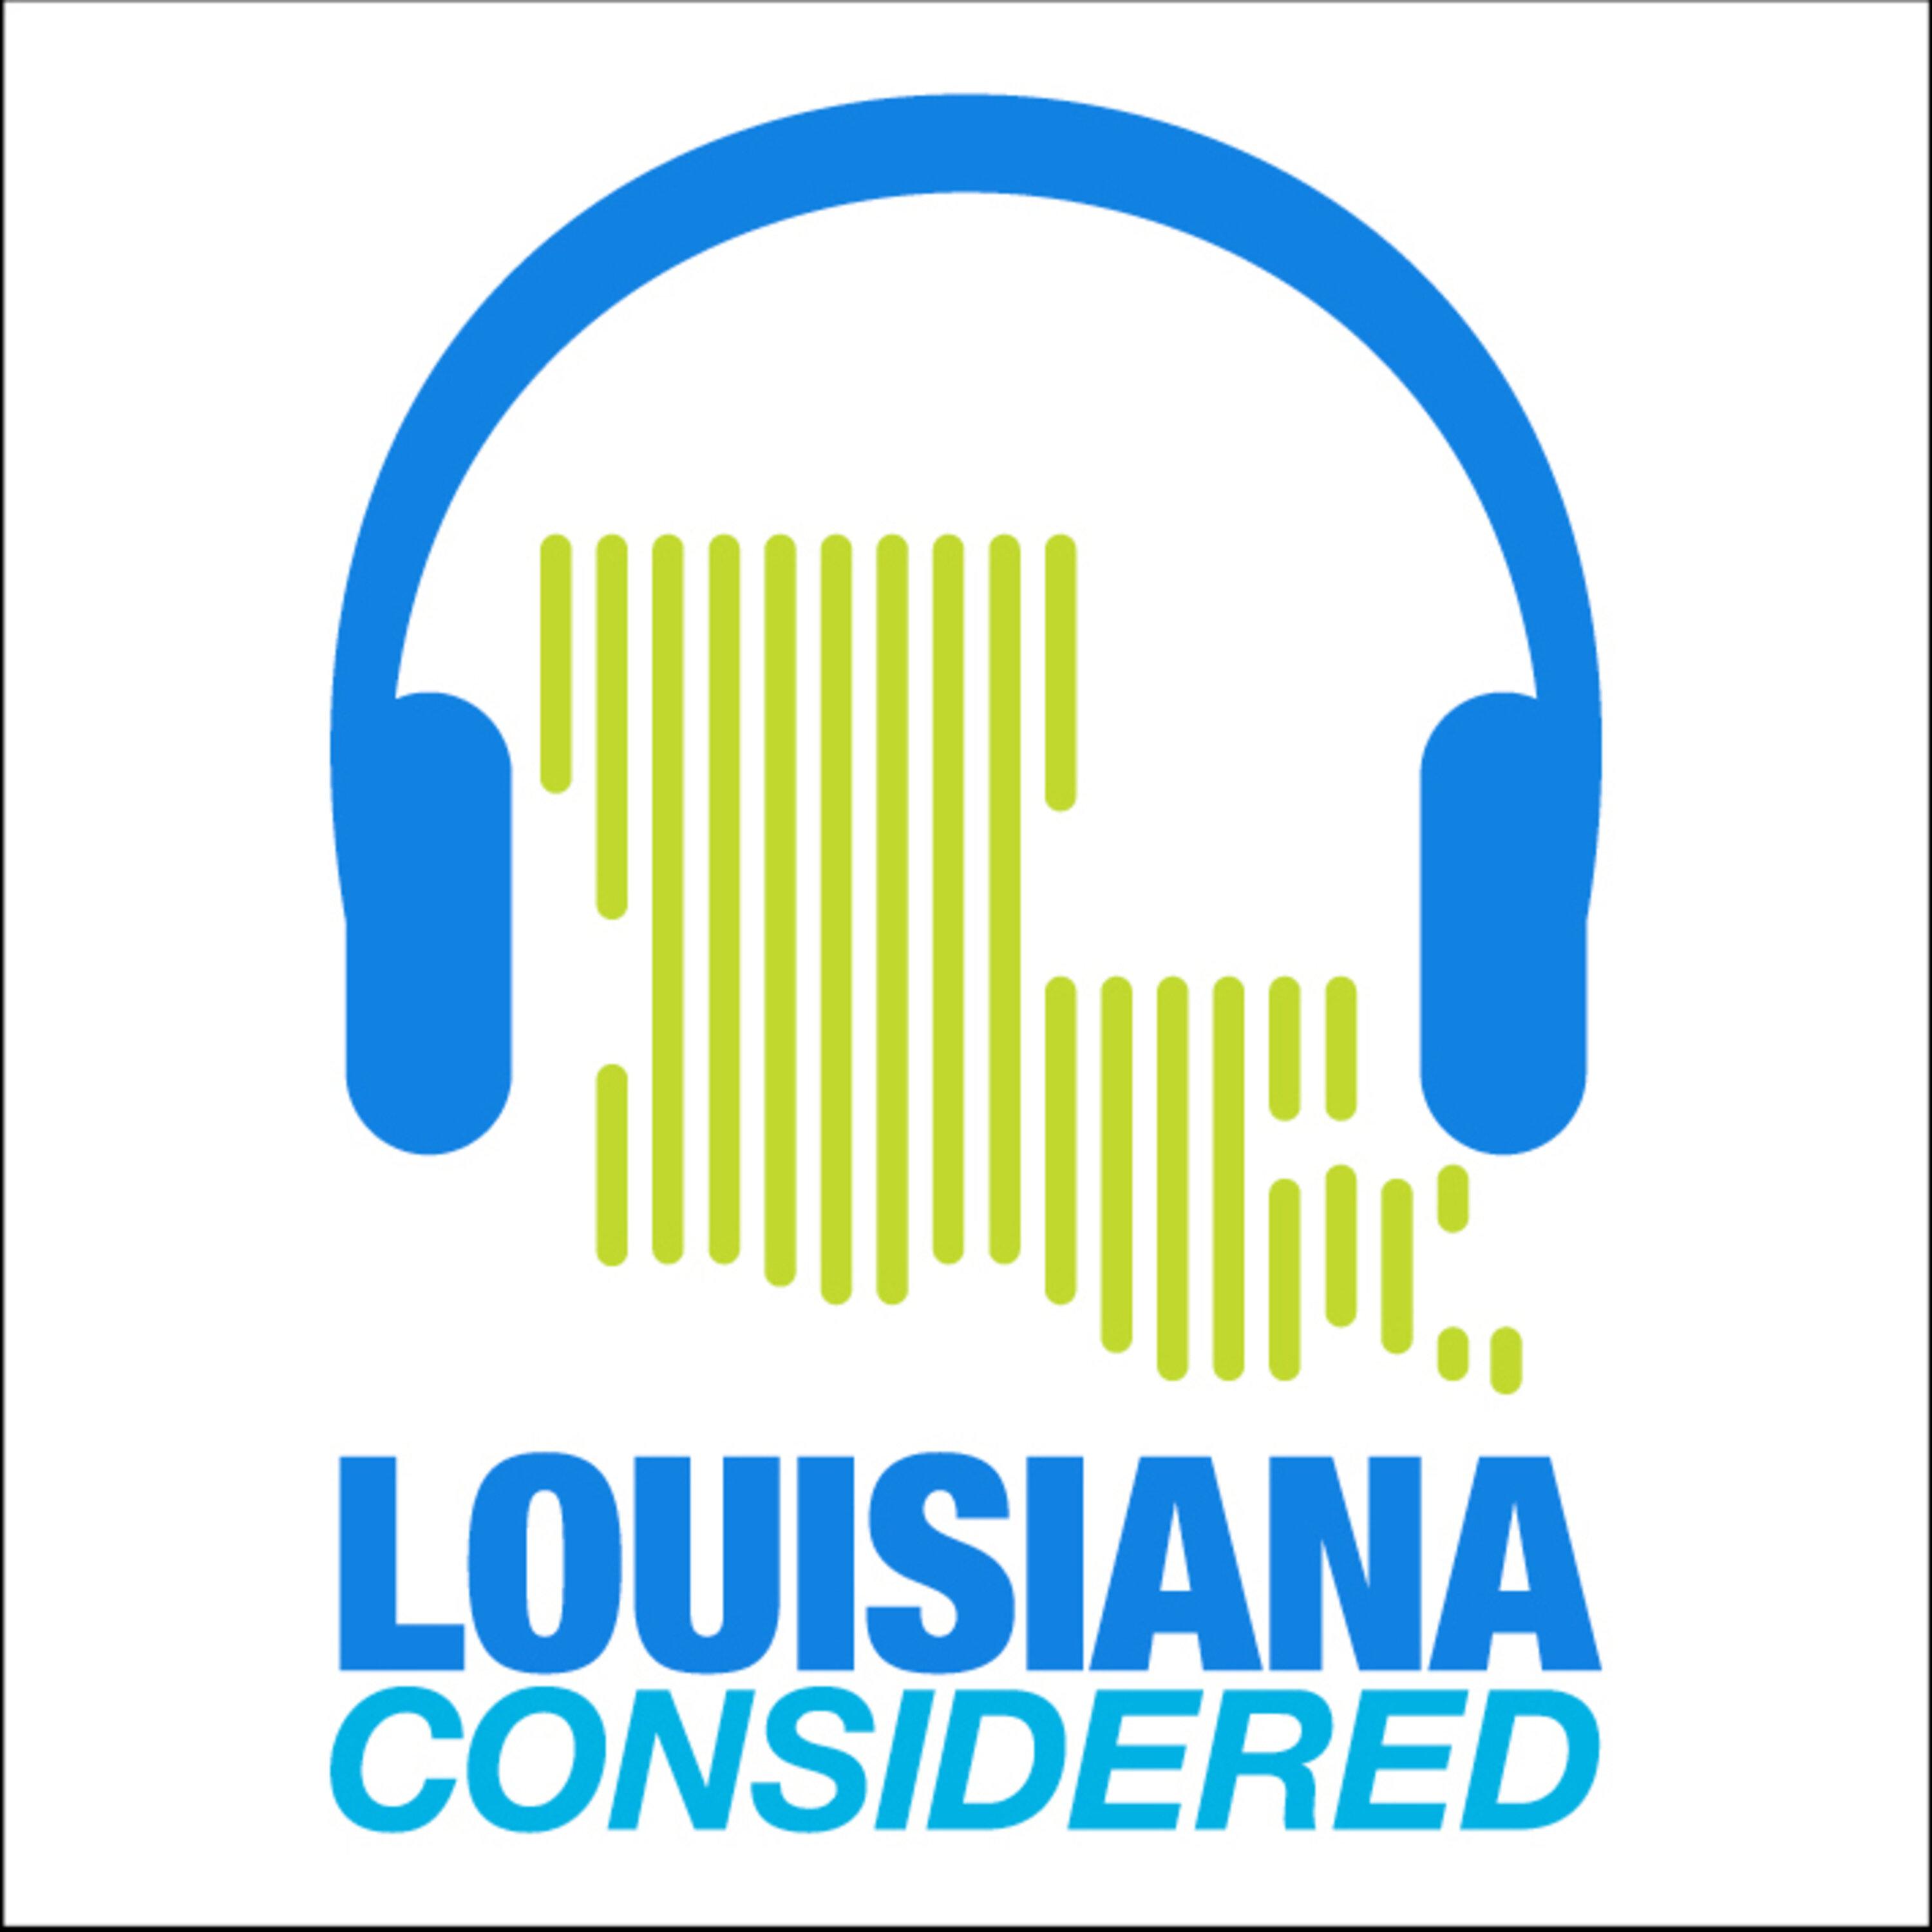 Thumbnail for "Louisiana Considered: What President Biden’s infrastructure bill means for Louisiana".